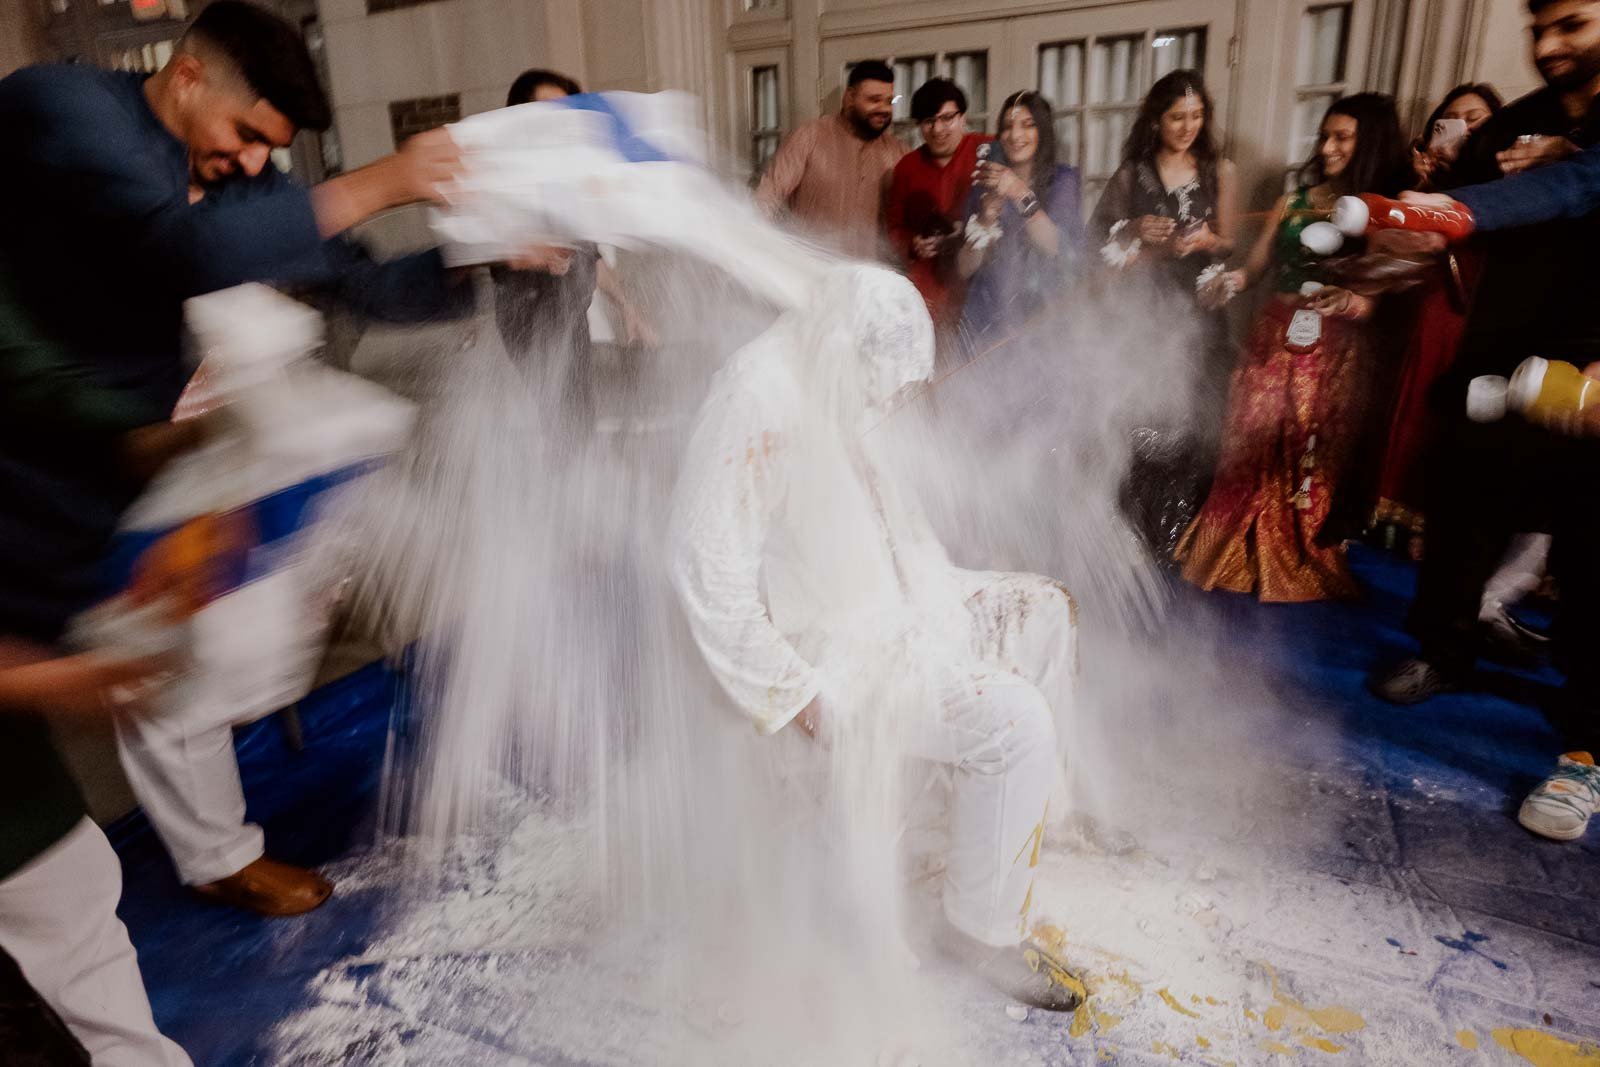 In modern times, the dirty pithi is a fun spin where the groom's family and friends throw food items, such as eggs, milk, flour, condiments, etc., to send him off to married life.